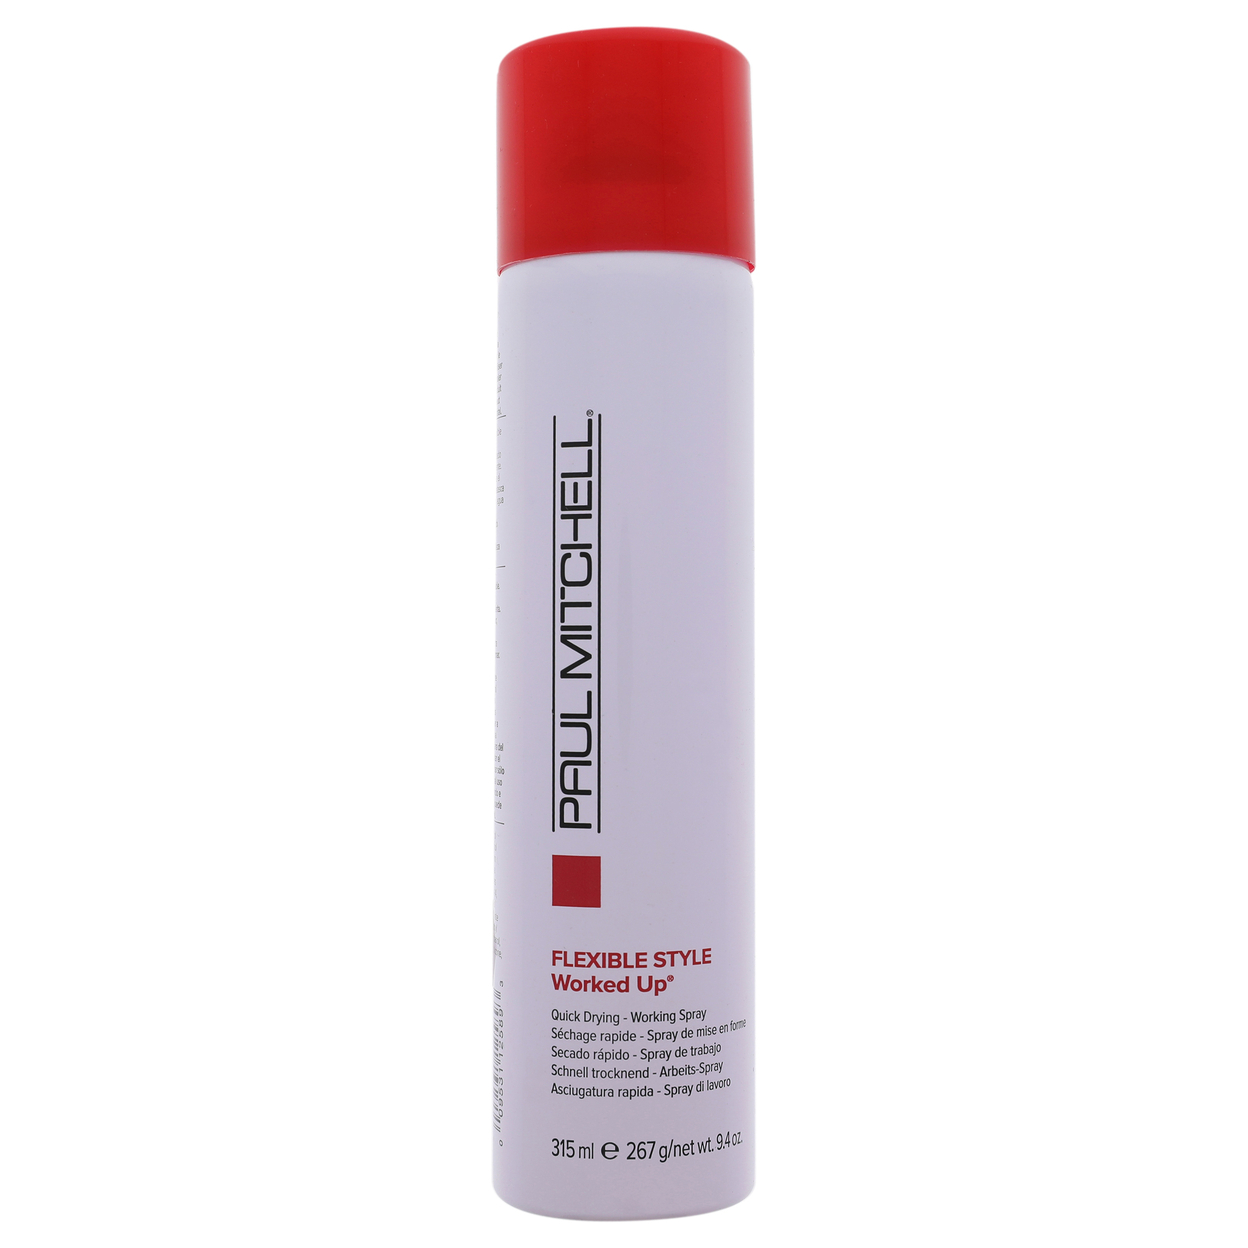 Paul Mitchell Worked Up Hairspray 9.4 Oz